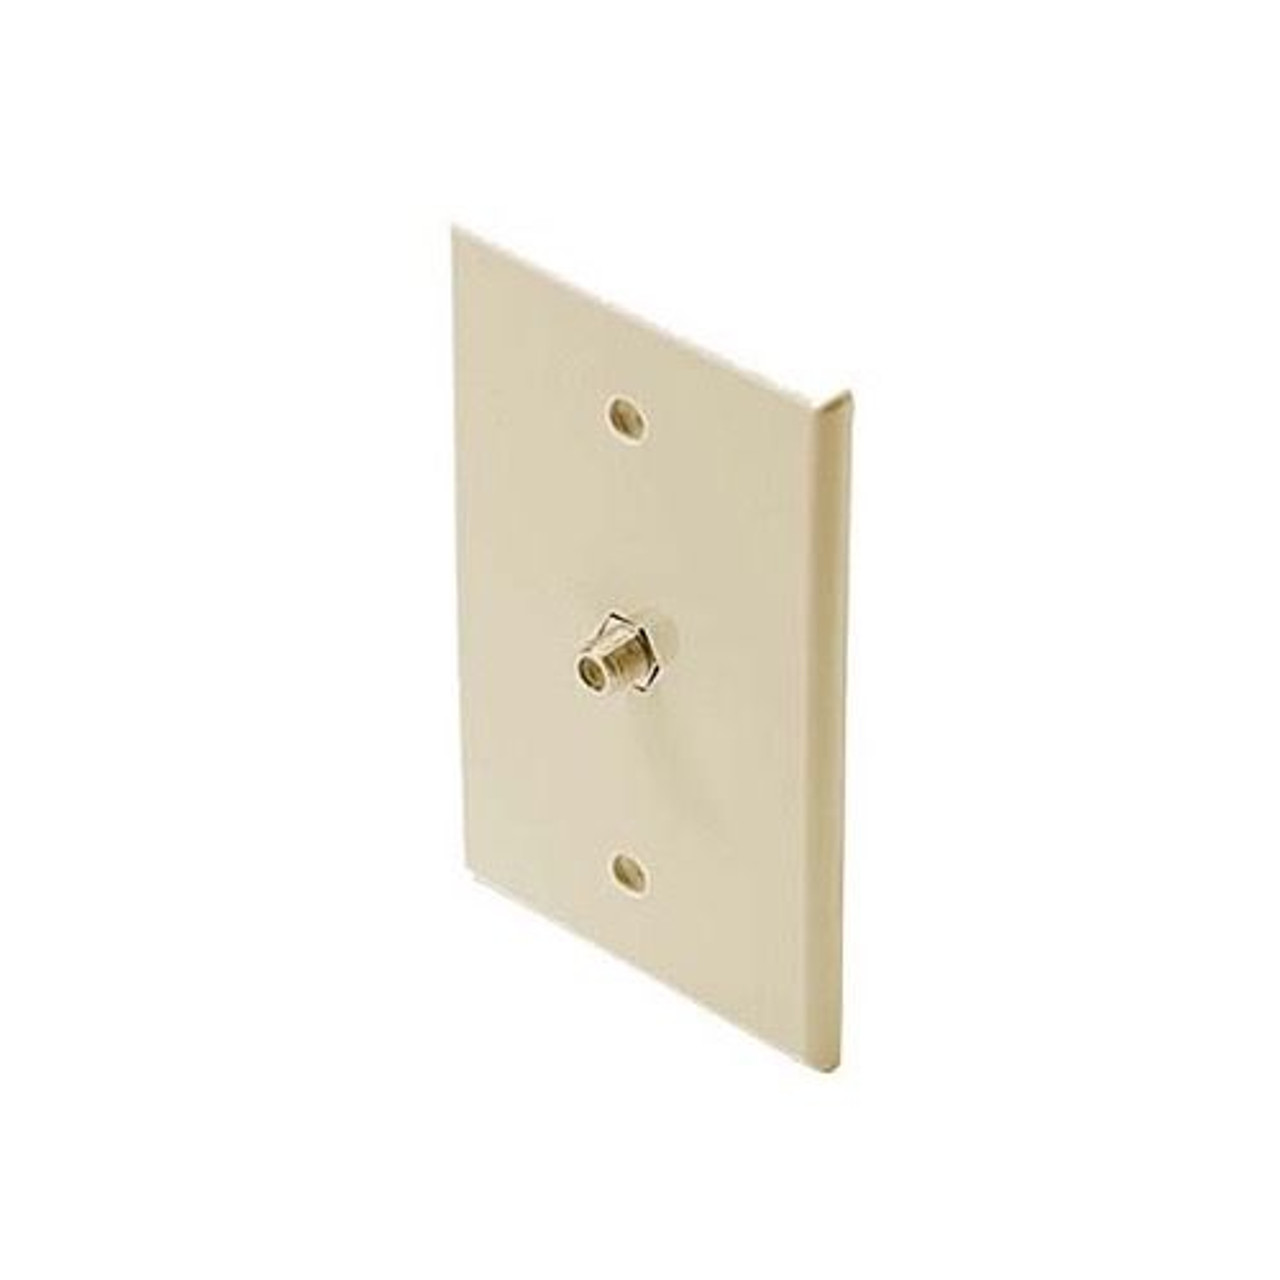 Eagle Midsize F-Connector Wall Plate Ivory HDTV Video Oversize 3 1/8" Inch Wide x 4 7/8" Tall F-81 Wall Plate 75 Ohm 1 Pack TV Aerial Antenna Plug